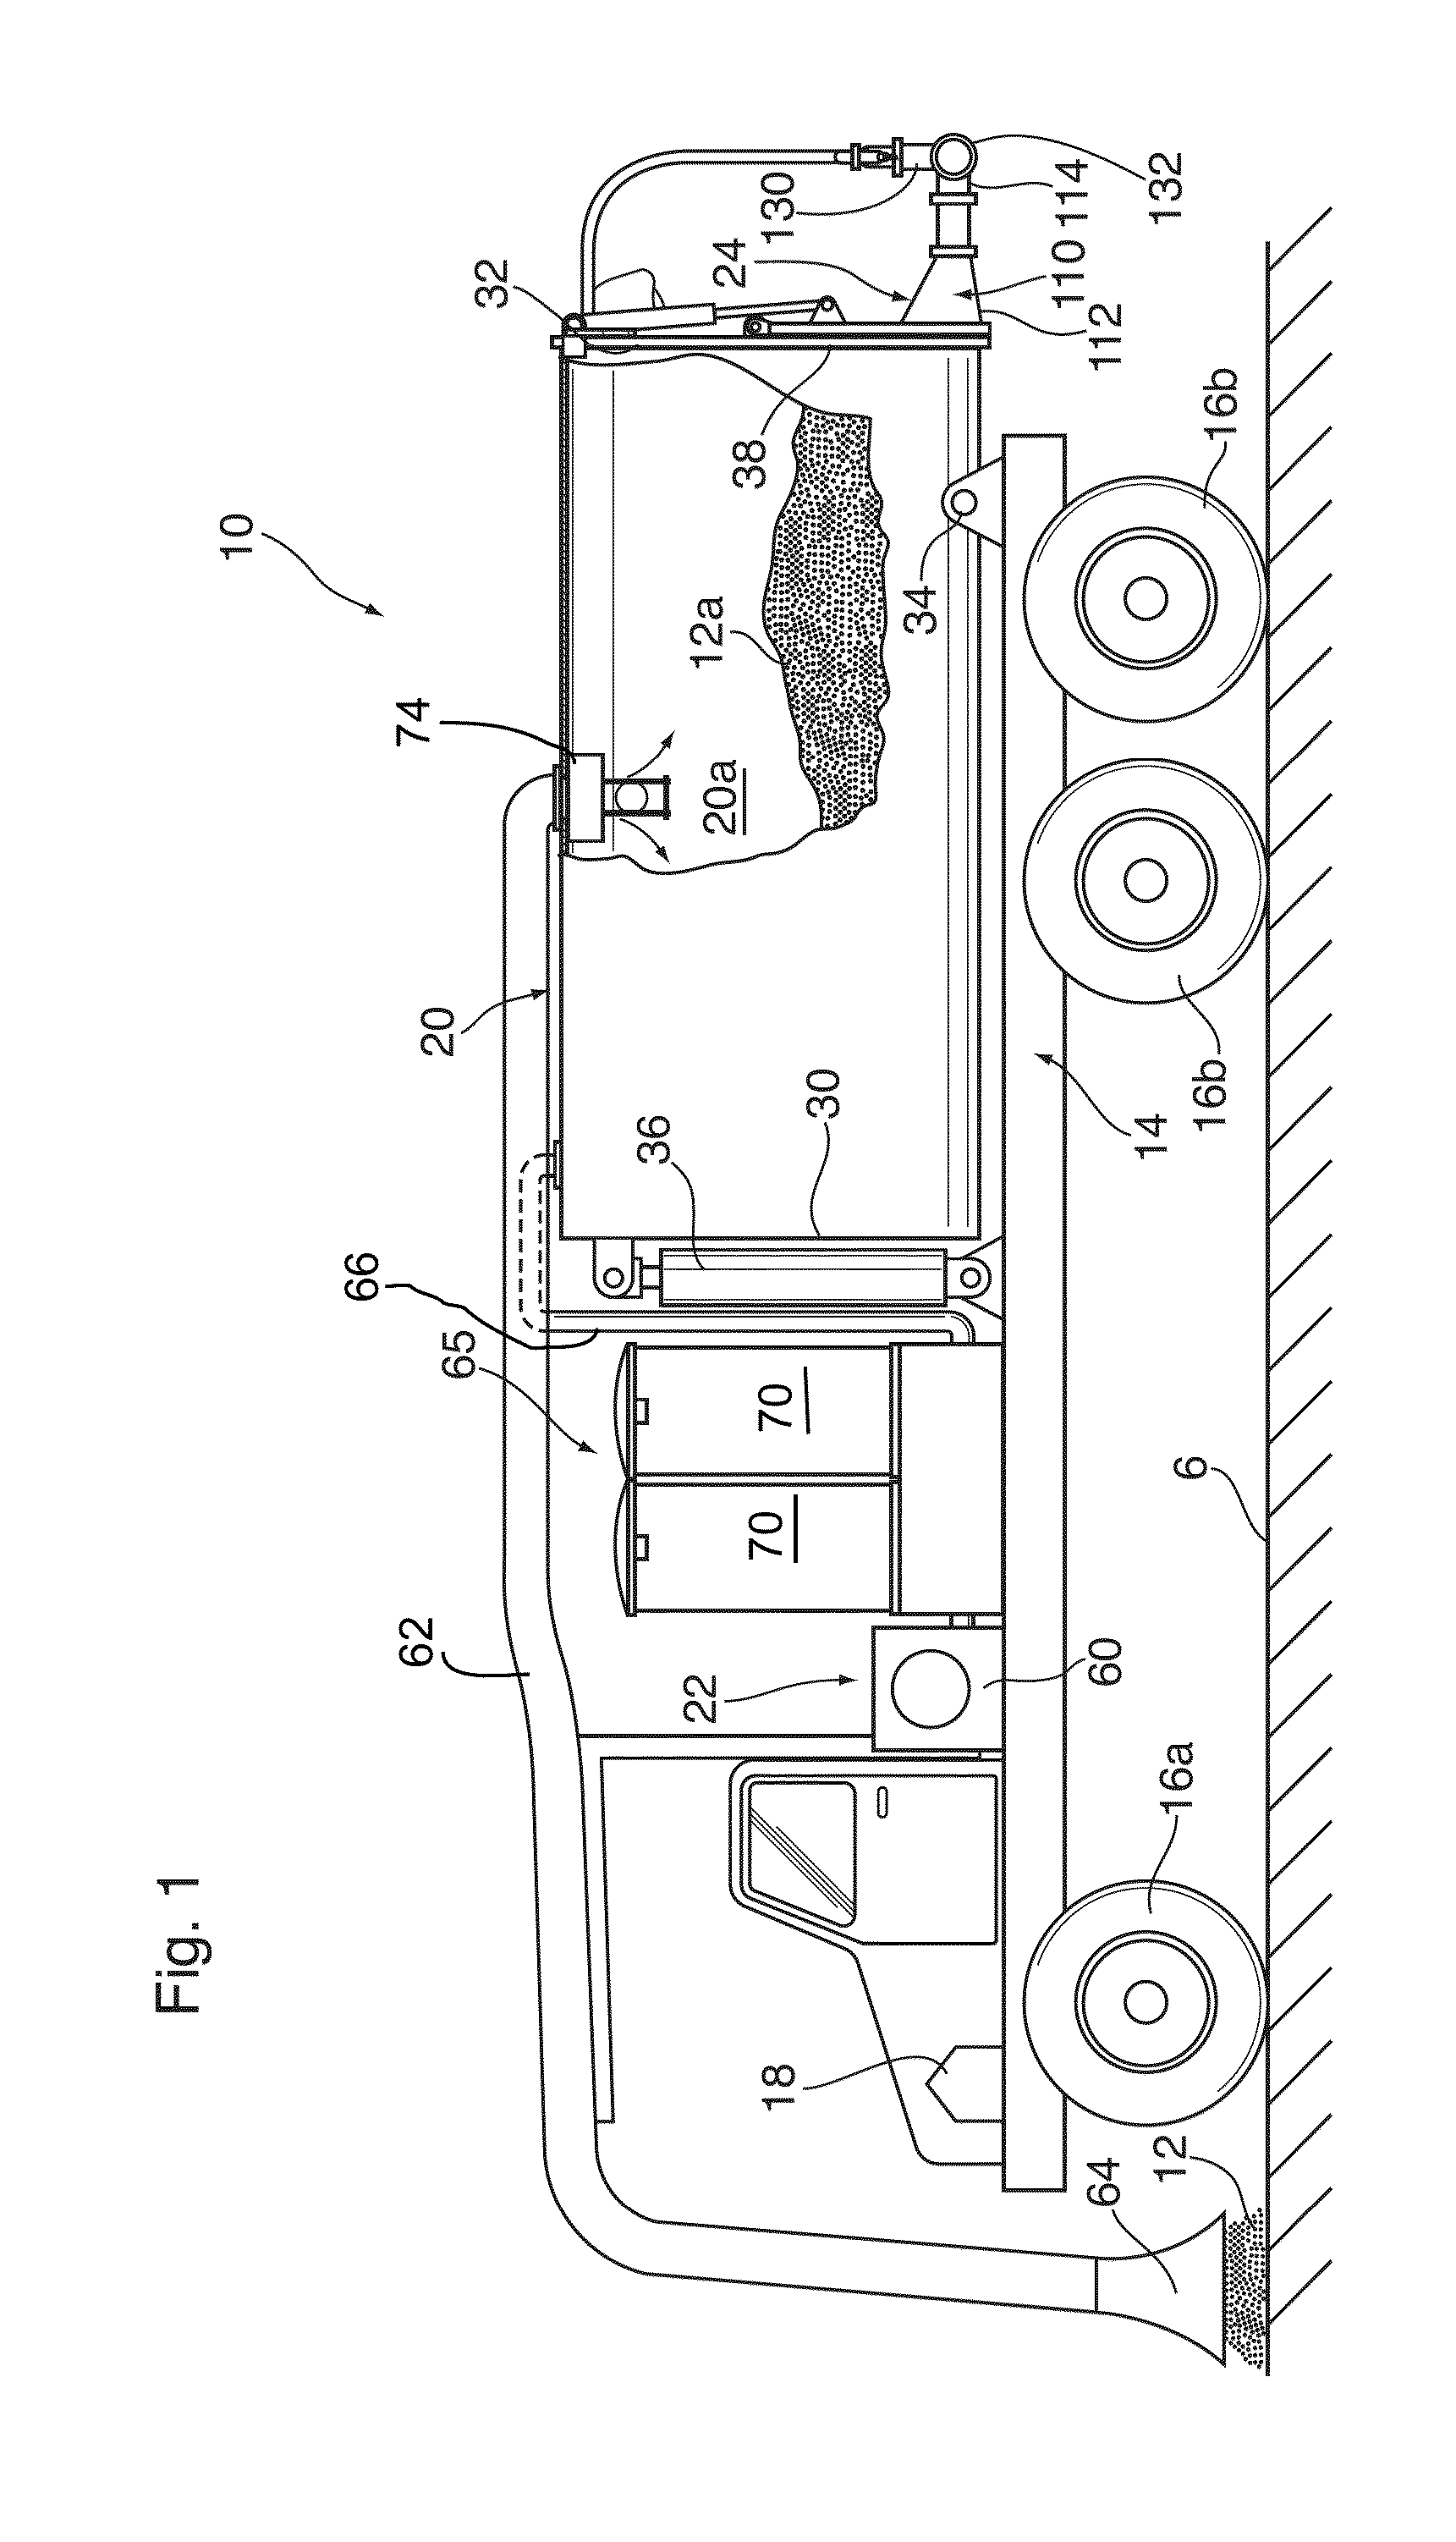 Vacuum Truck With Pneumatic Transfer System